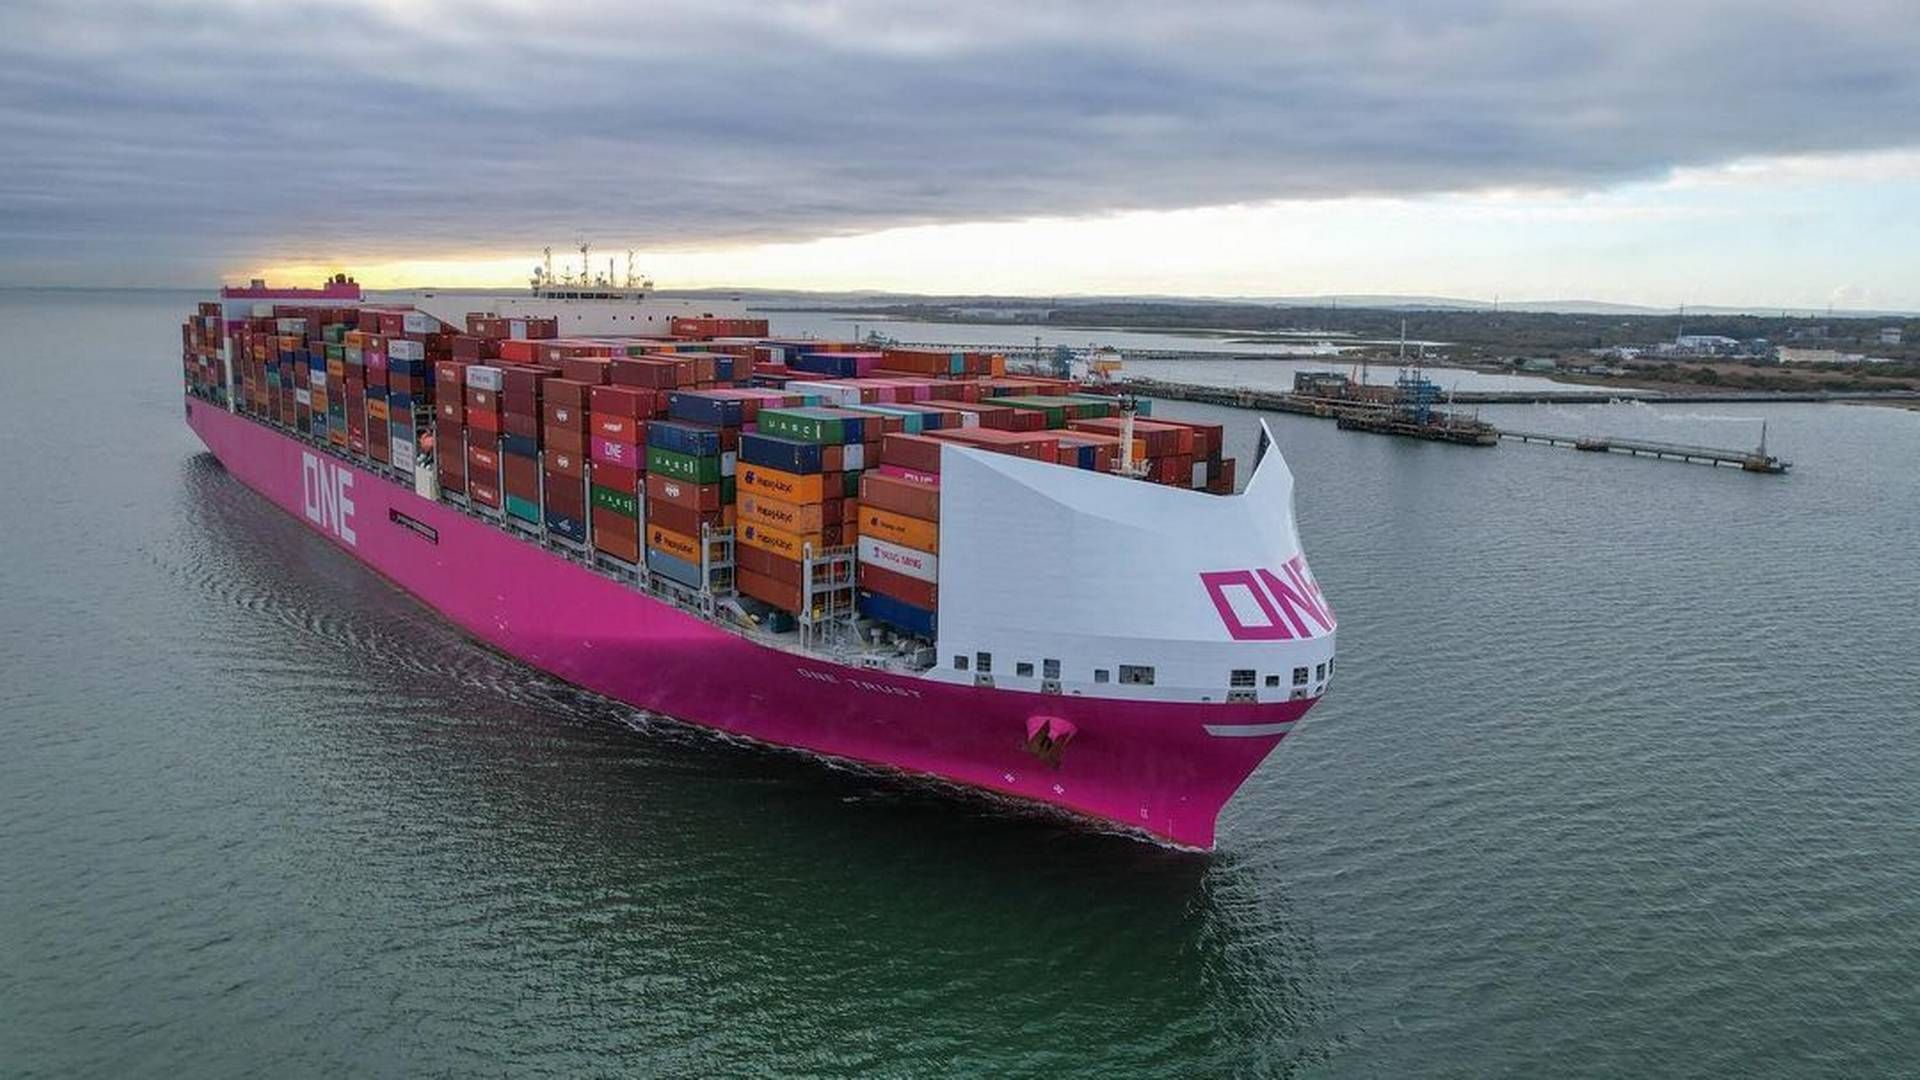 The new ships will be equipped with a special cover to reduce windage. | Photo: Ocean Network Express